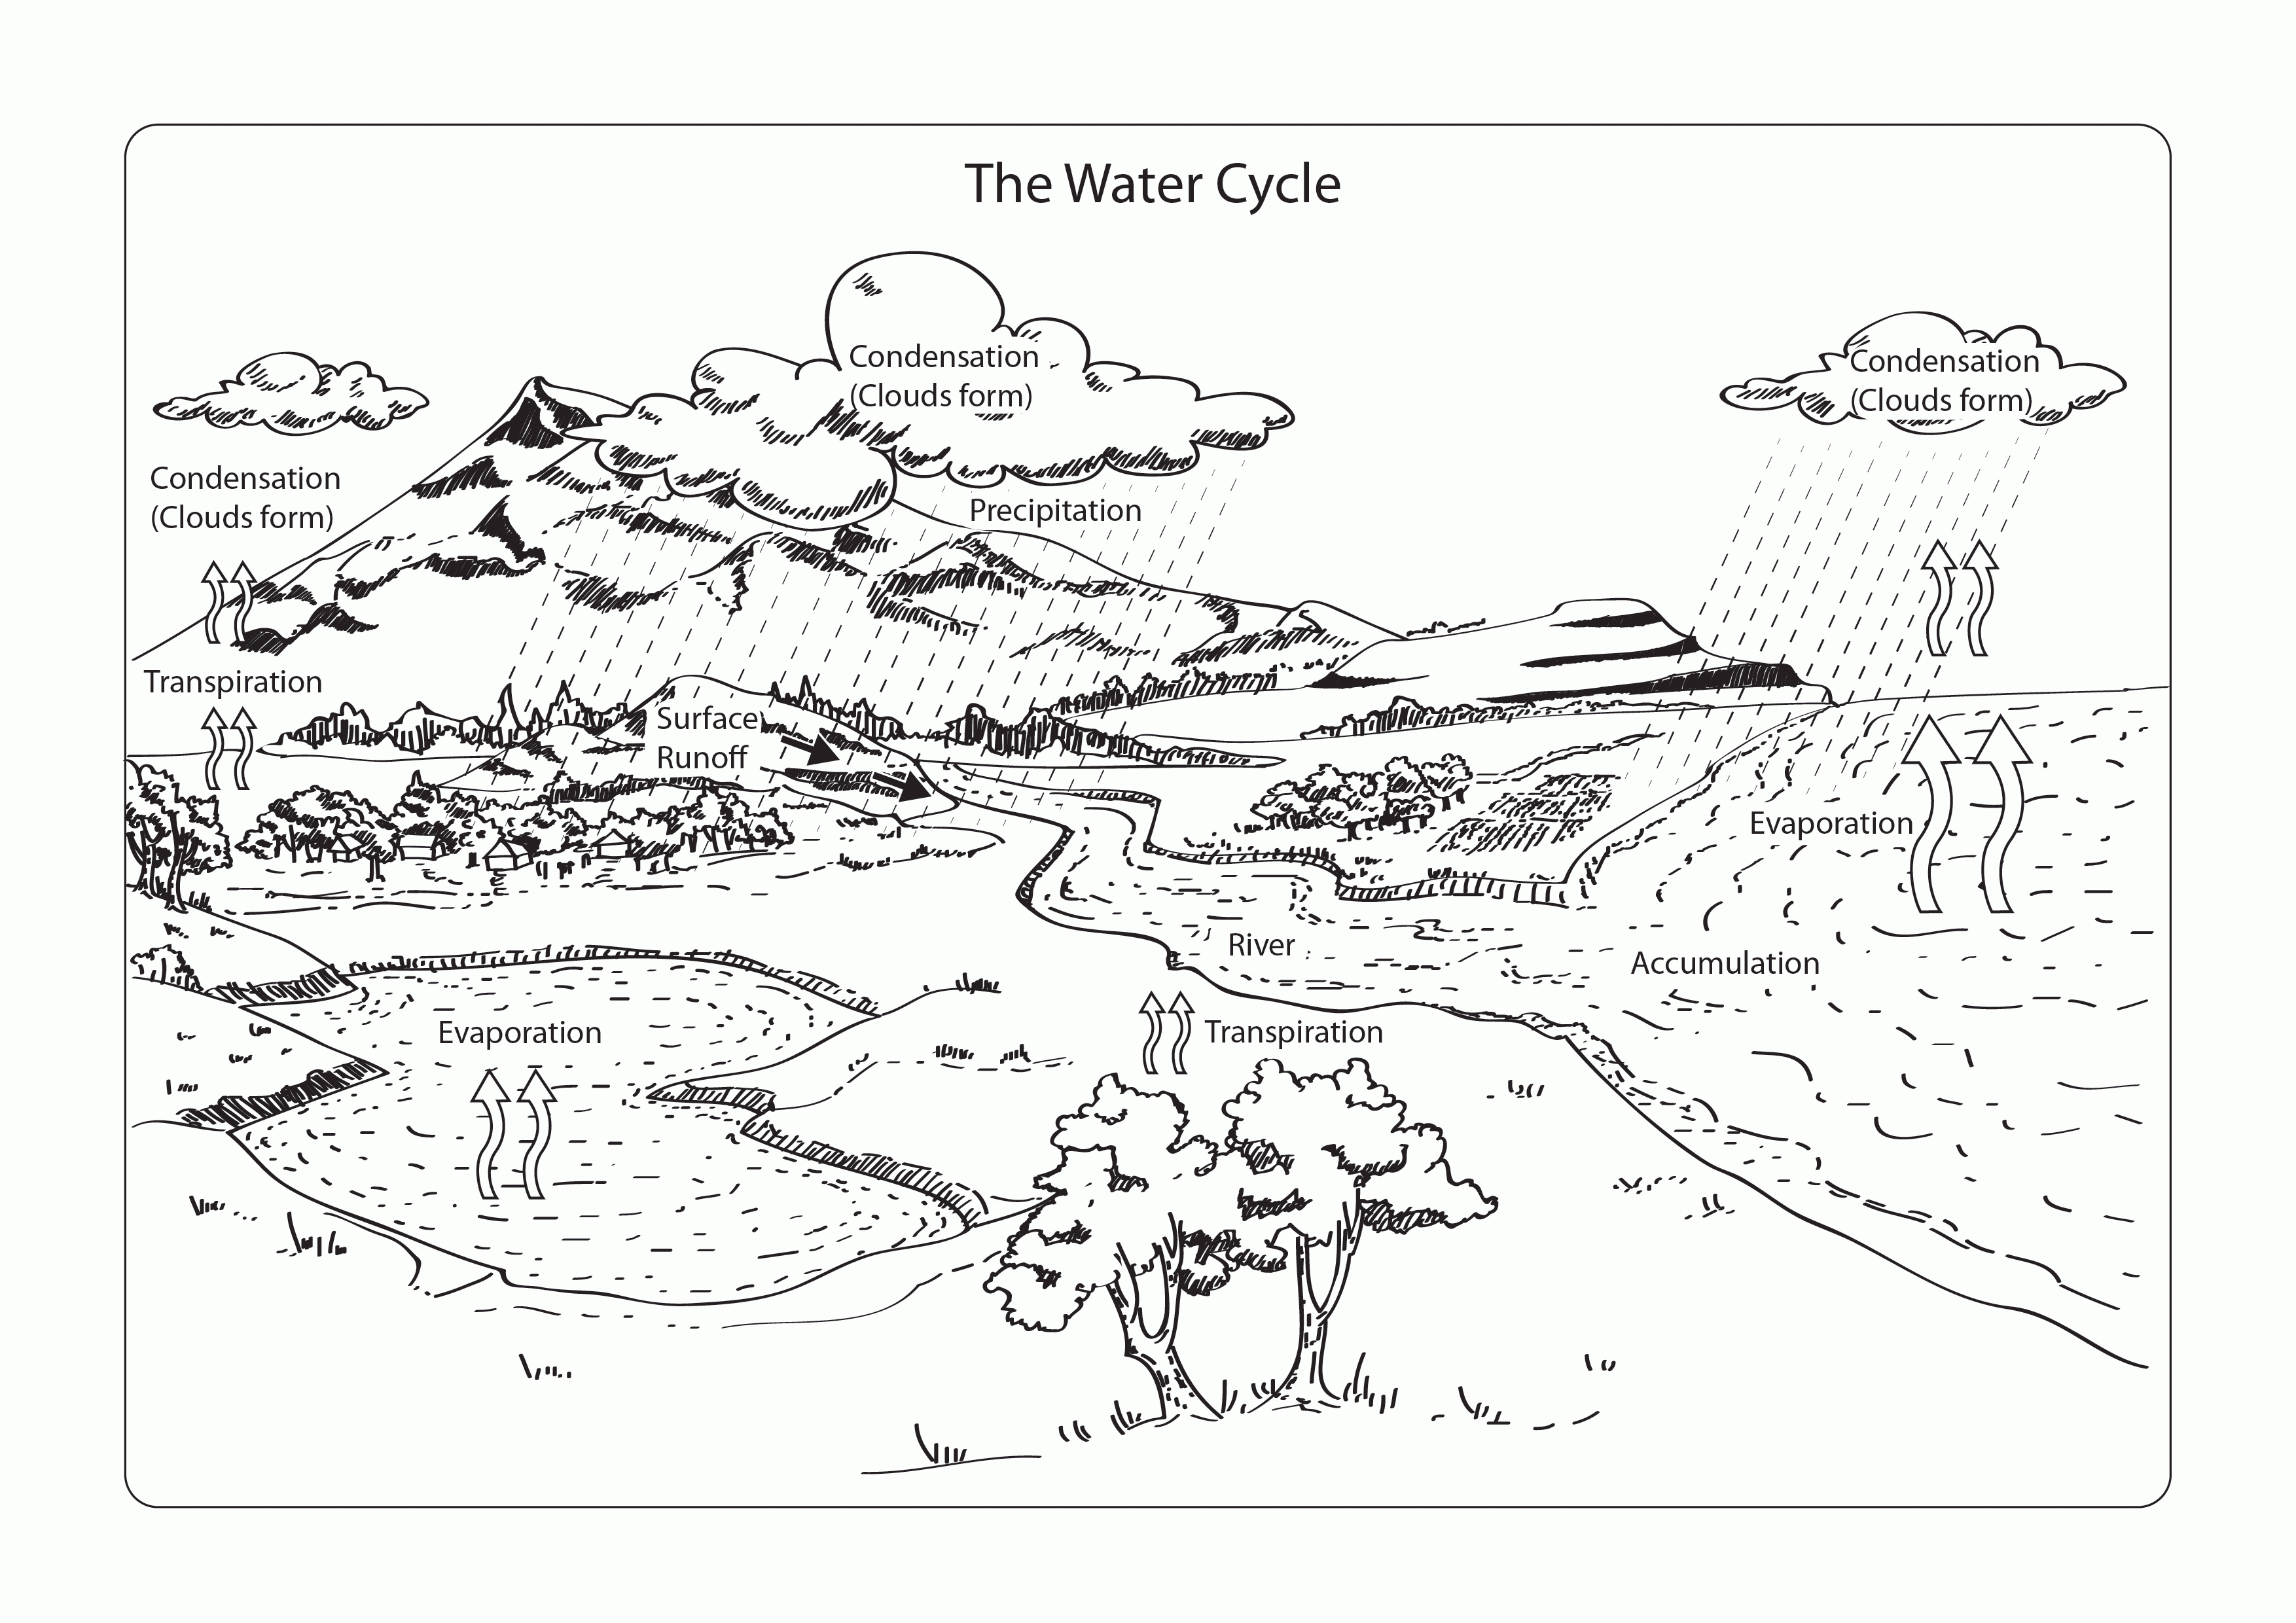 Coloring Pages Kids 101: Slacker's Guide To Free Printable Water Cycle